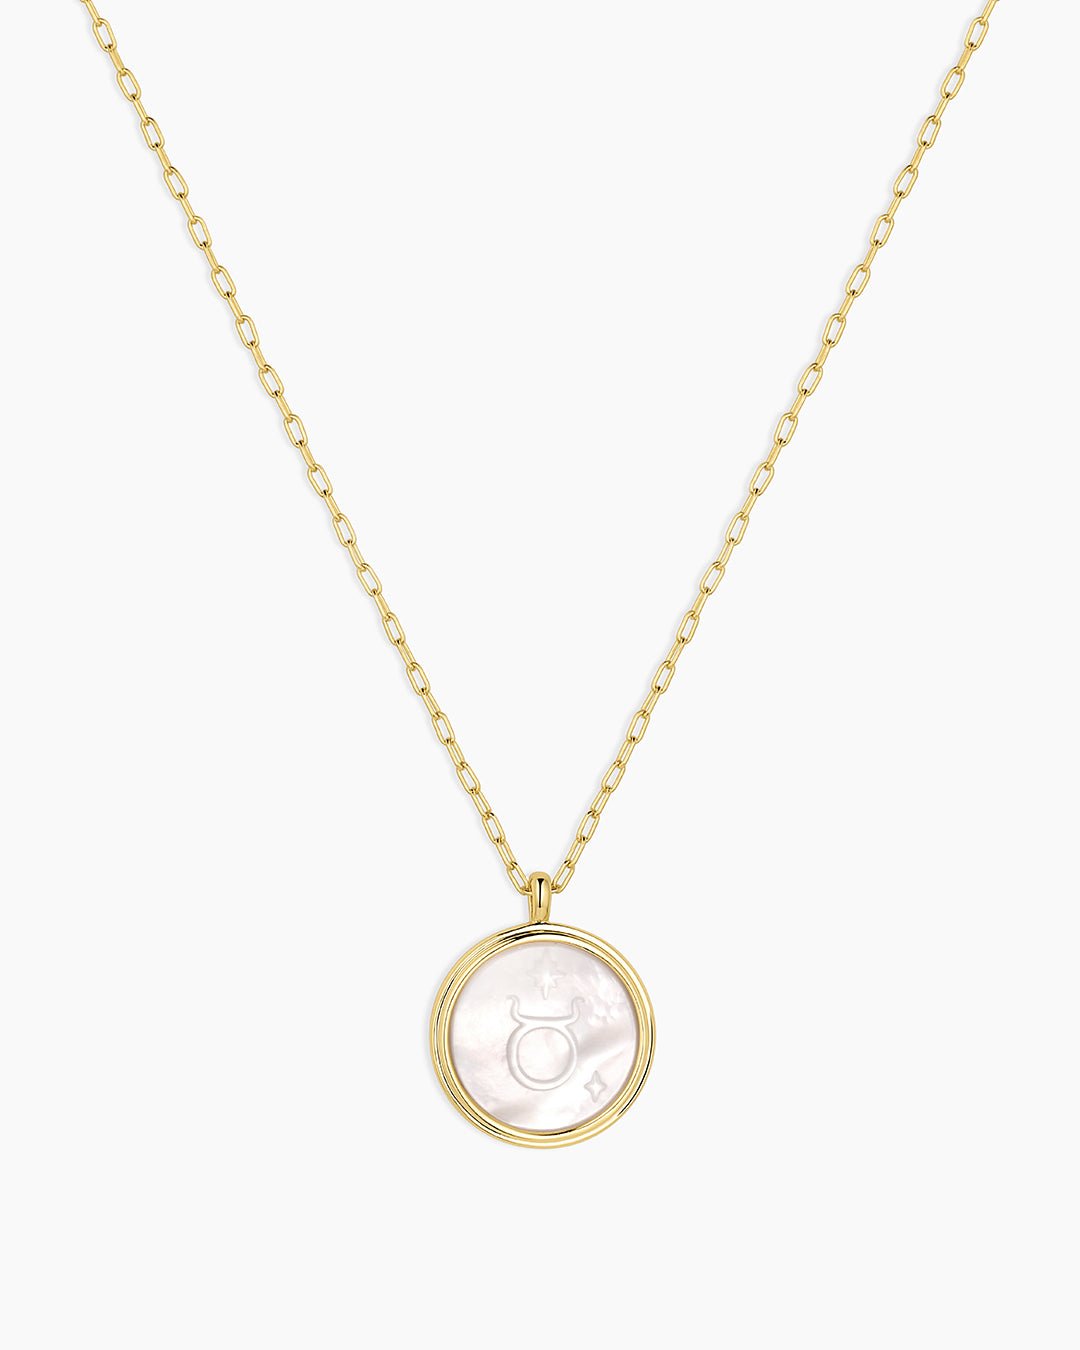 Zodiac Necklace - Gemini, Astrology Coin Necklace, Gemini Necklace || option::Gold Plated, Taurus